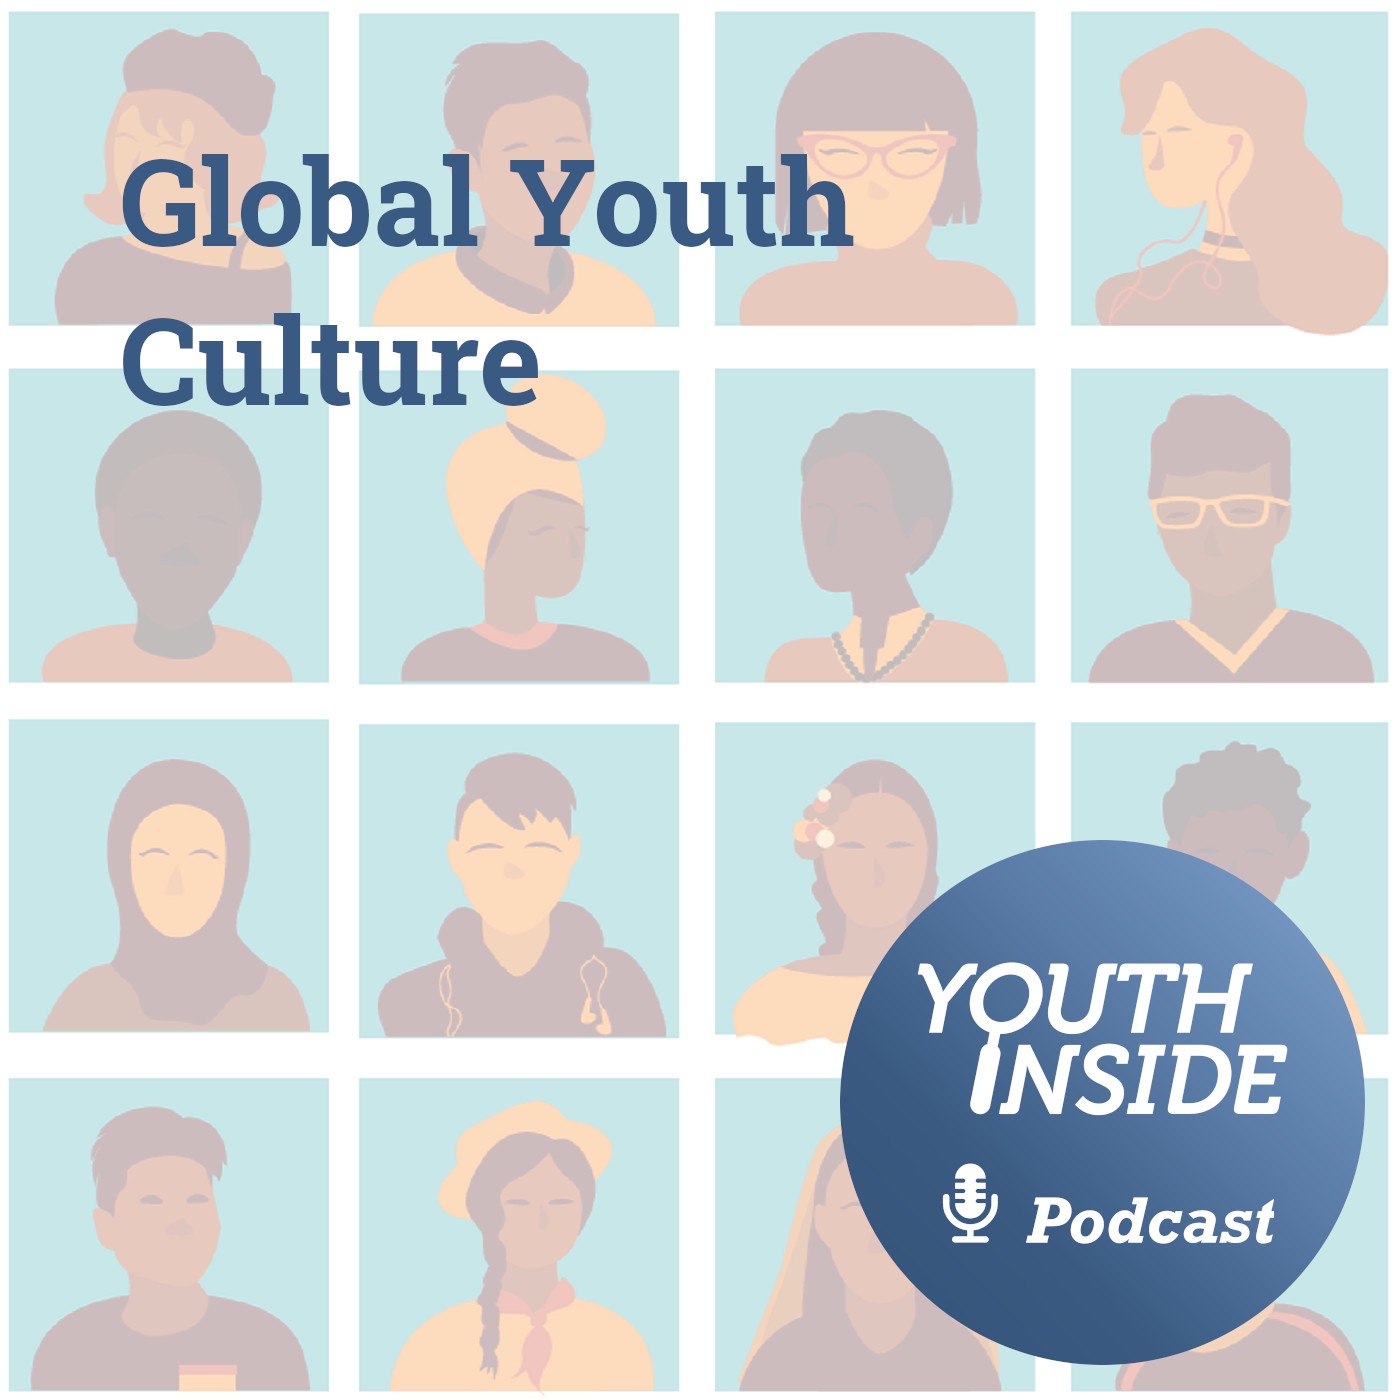 Global Youth Culture 1/3